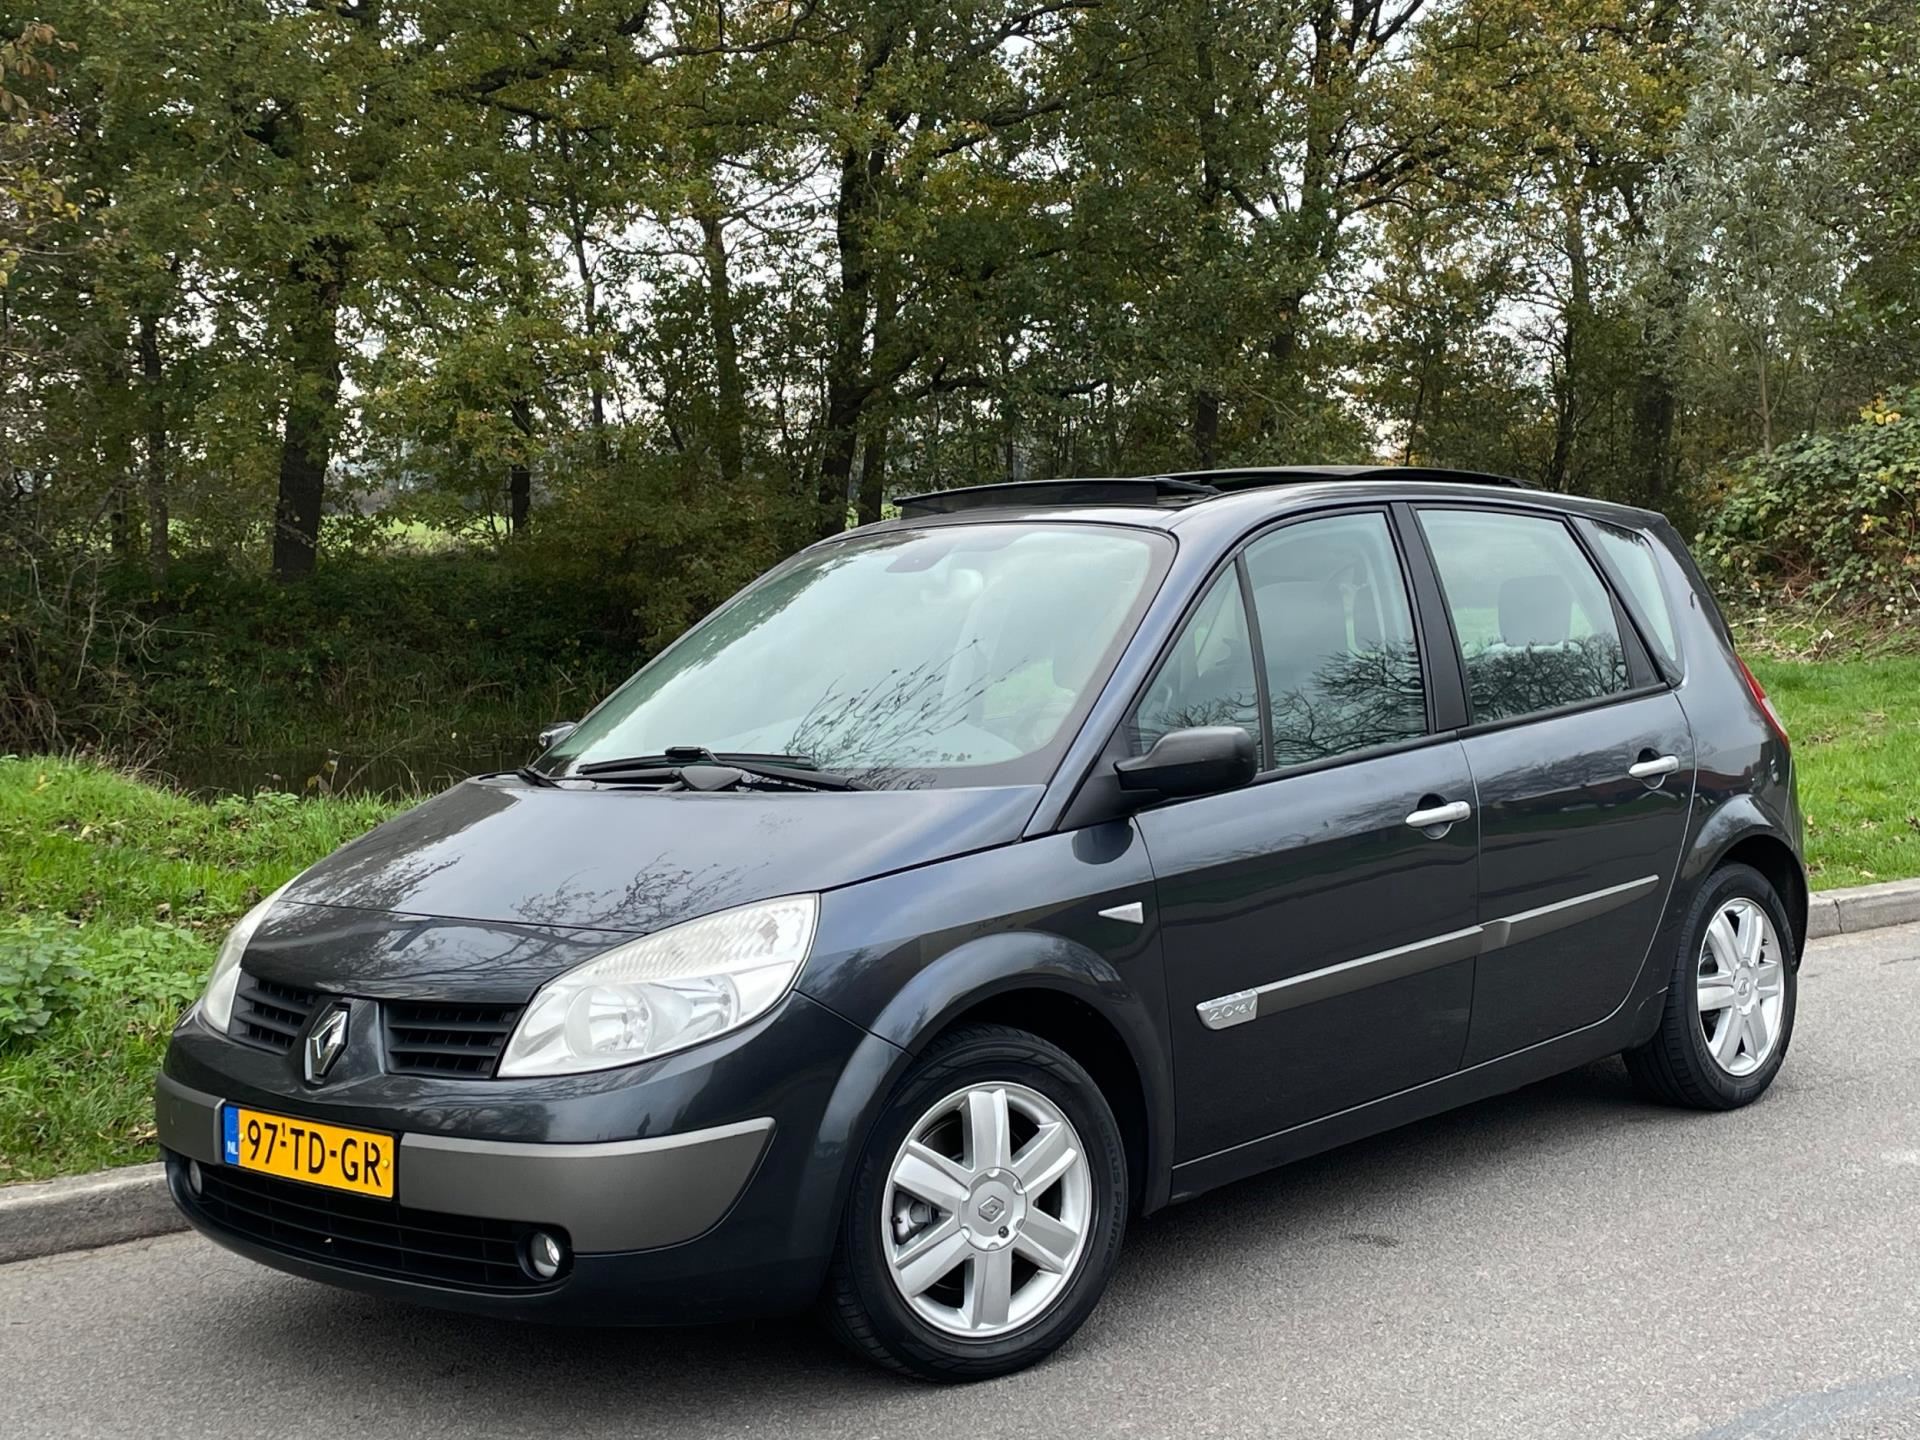 Zonnebrand adopteren Feodaal Renault Scénic - 2.0- 16V Tech Line LPG- G3 AUTOMAAT AIRCO/ PANO/ KEYLESS  ENTRY- GO | NETTE AUTO ! LPG uit 2006 - www.firstautoplaza.nl